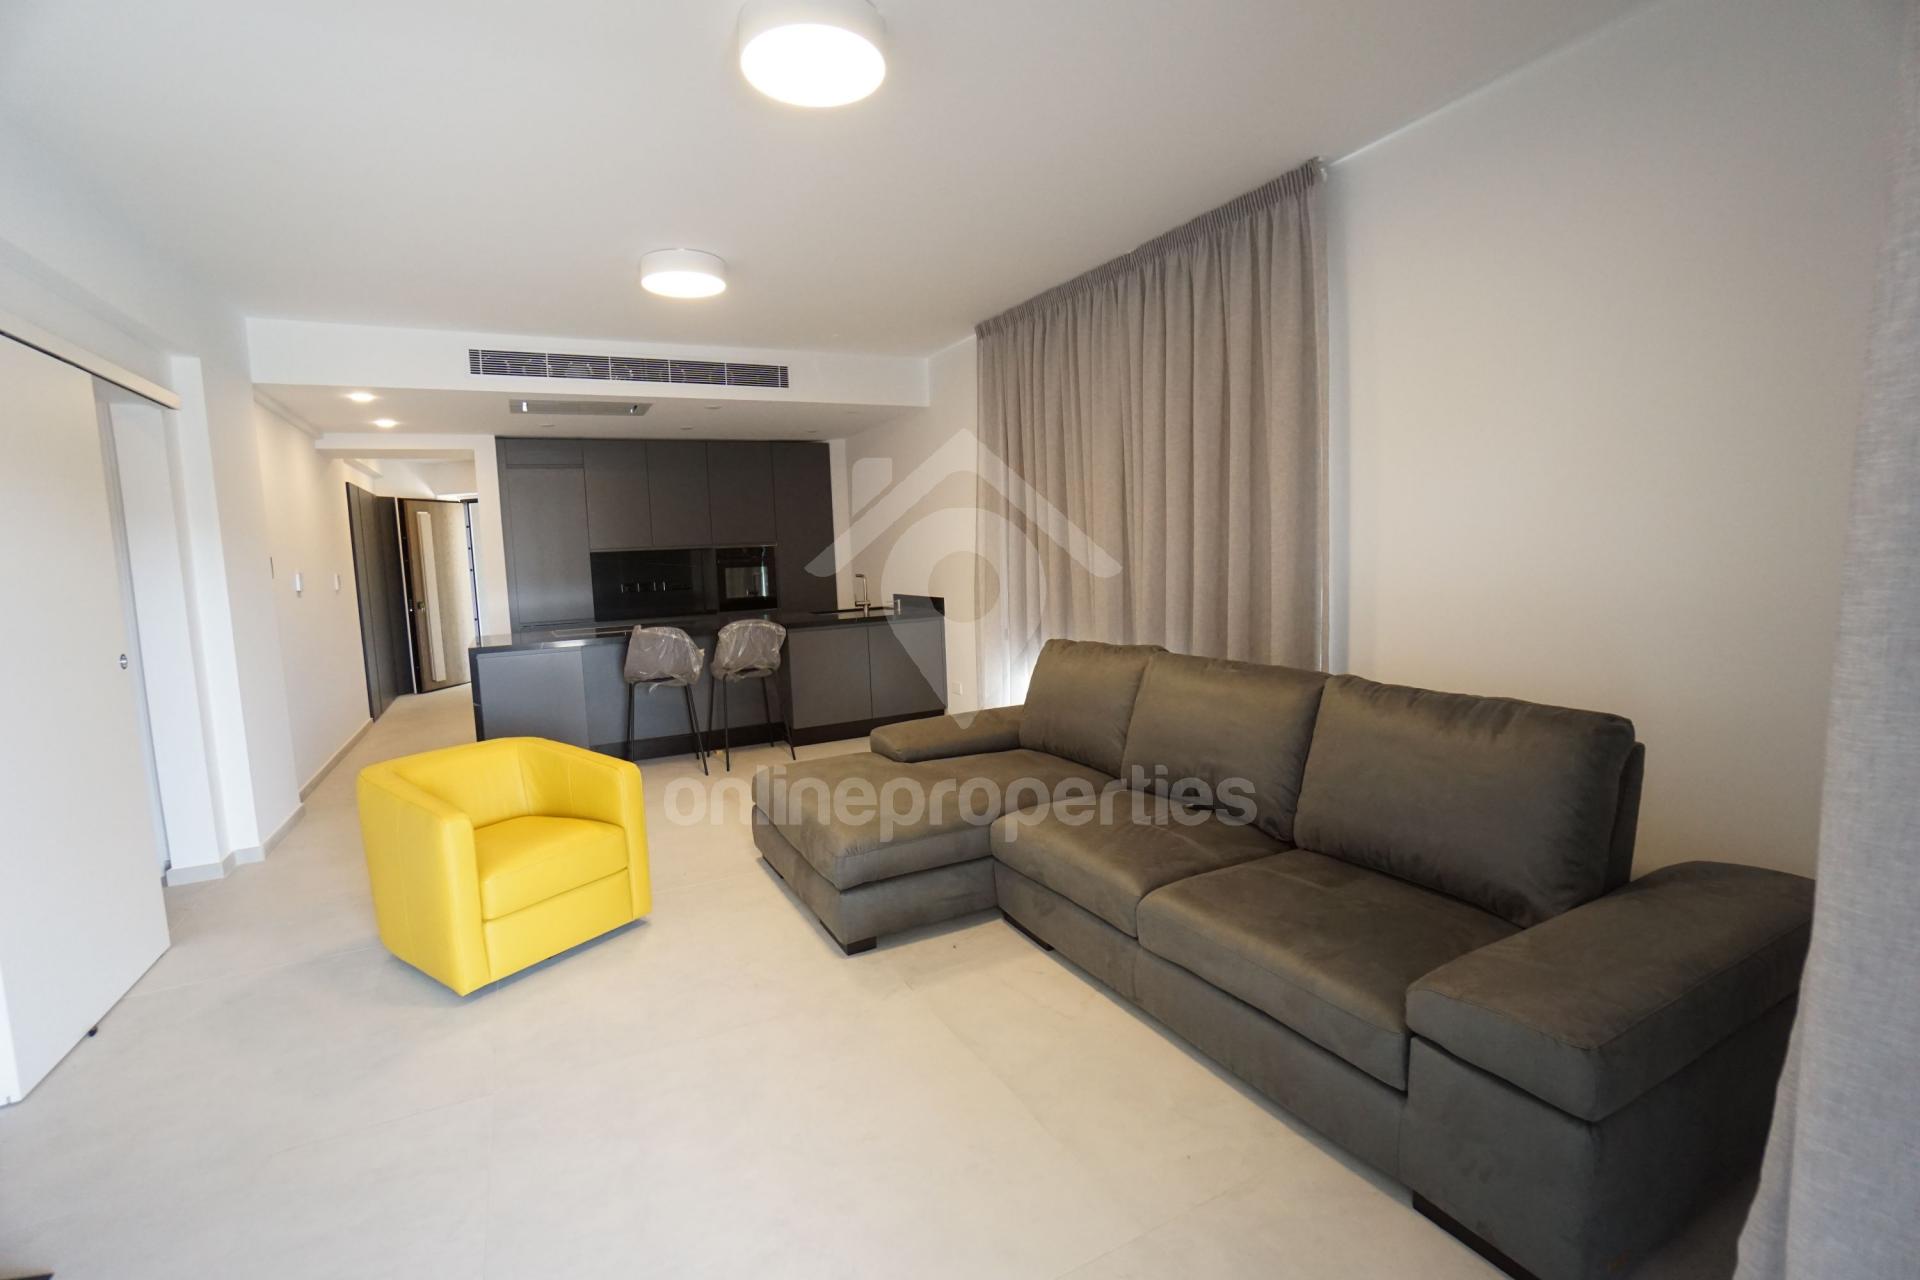 Amazing brand new 3-bedroom flat, all en suite, furnished